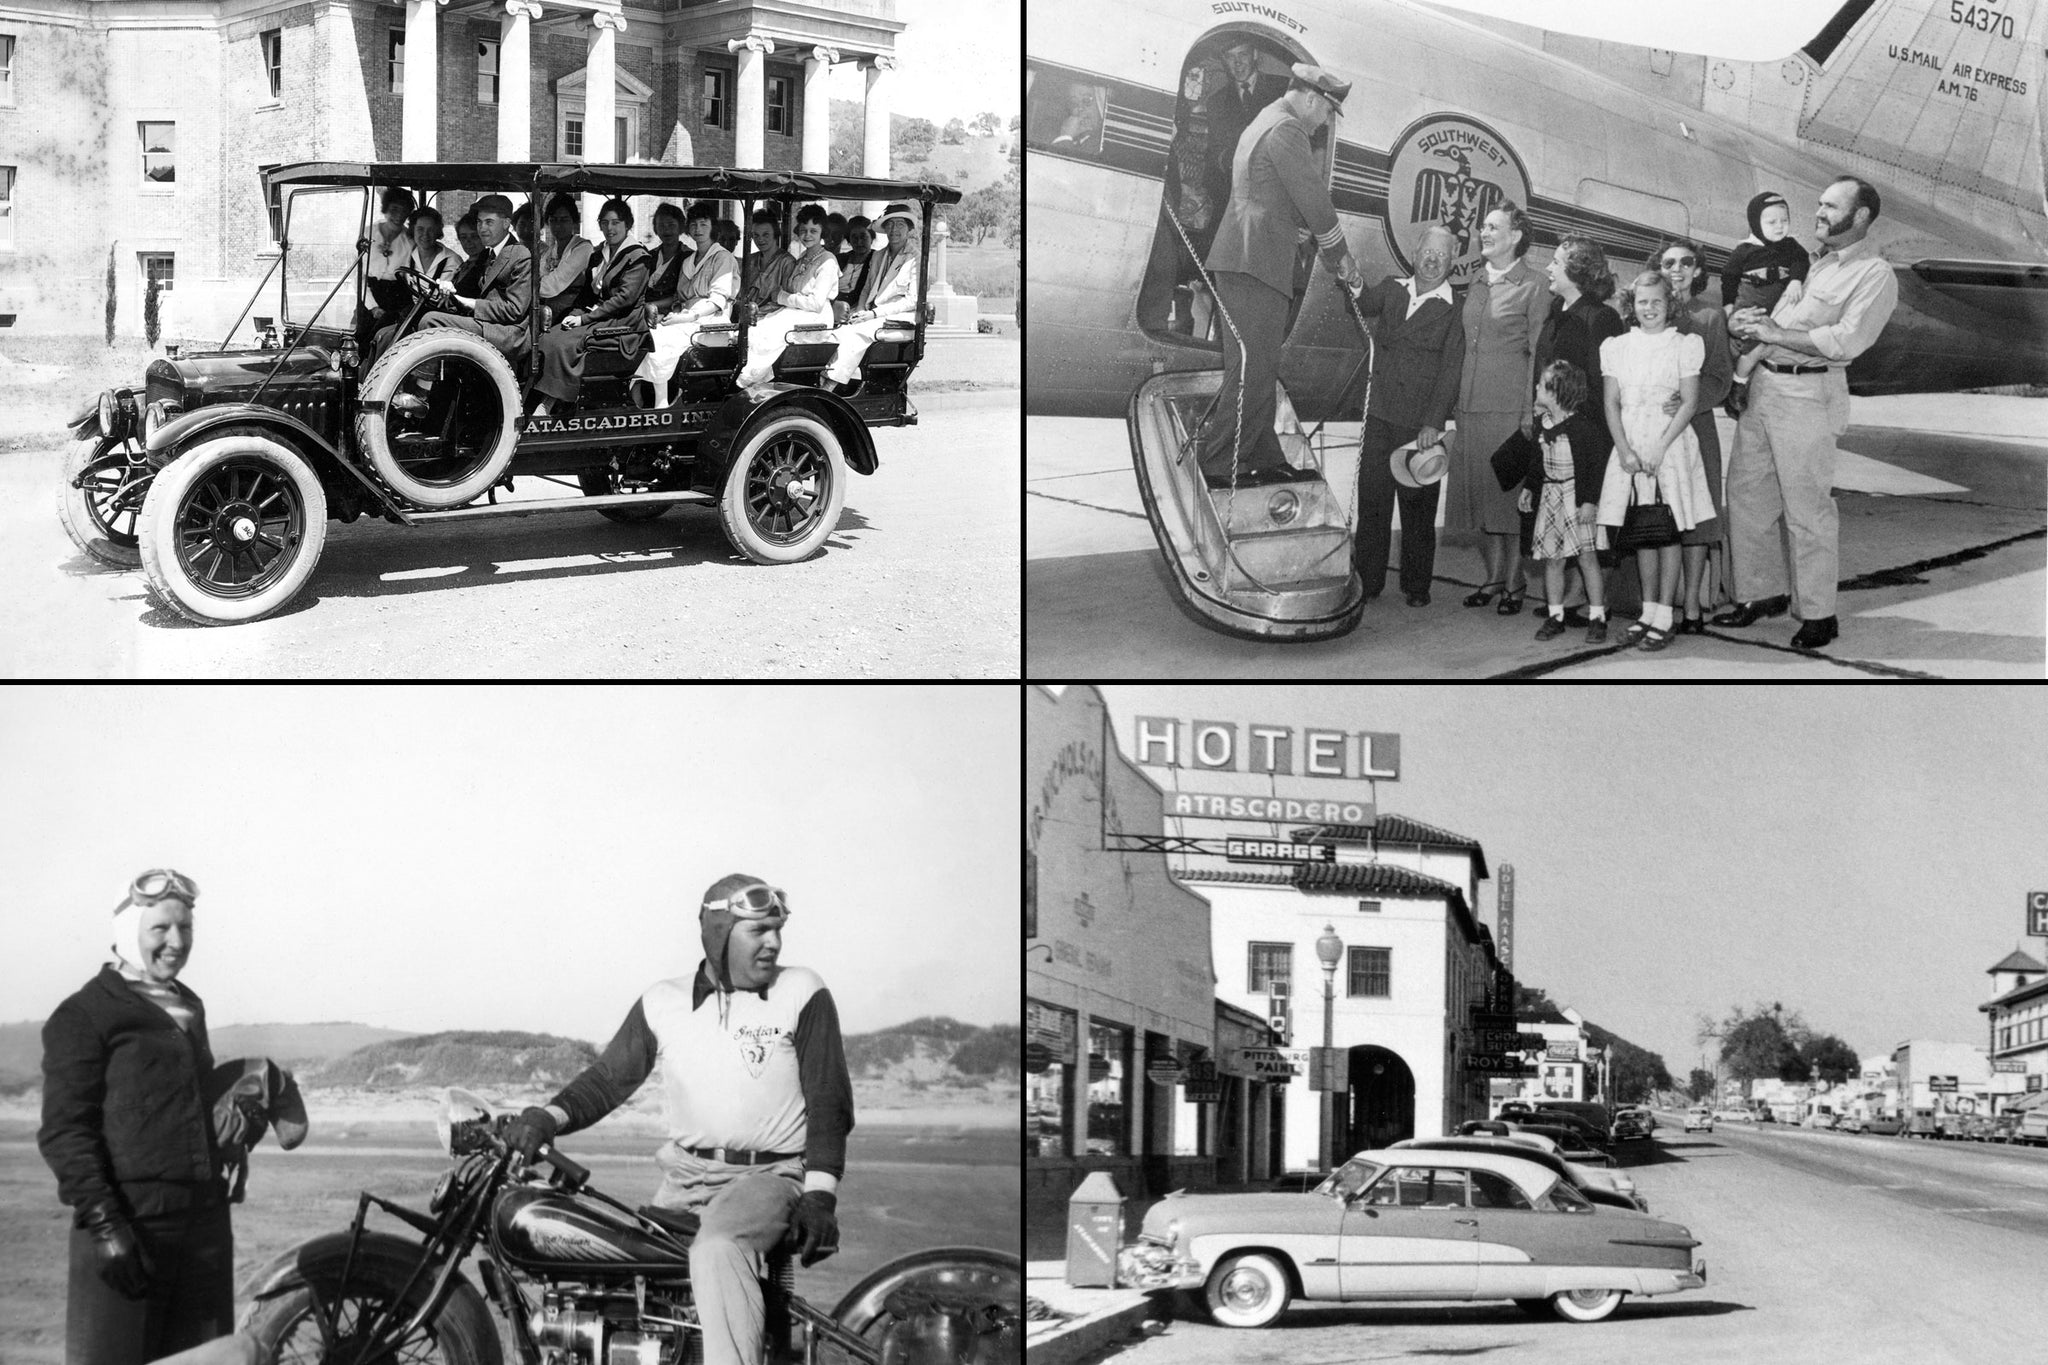 From top left, clockwise: 1)  A touring bus from Atascadero Inn in front of the Atascadero administration building, circa 1920. 2)  Exline Brown of Paso Robles making the first commercial flight into Paso Robles airport, 1949. Exline’s father, Joe F. Brown, is shaking Exline’s hand. Also pictured are Exline’s mother, sister, brother, nieces and nephews. 3)  View of El Camino Real, Atascadero, 1951. 4) Margaret and Joe C. Brown with their Indian 4 motorcycle, Atascadero Beach, south of Morro Bay, 1942. -- Courtesy of 1) Atascadero Historical Society, 2) Paso Robles Pioneer Museum, 3) Alan Curtis, 4) Paso Robles Pioneer Museum